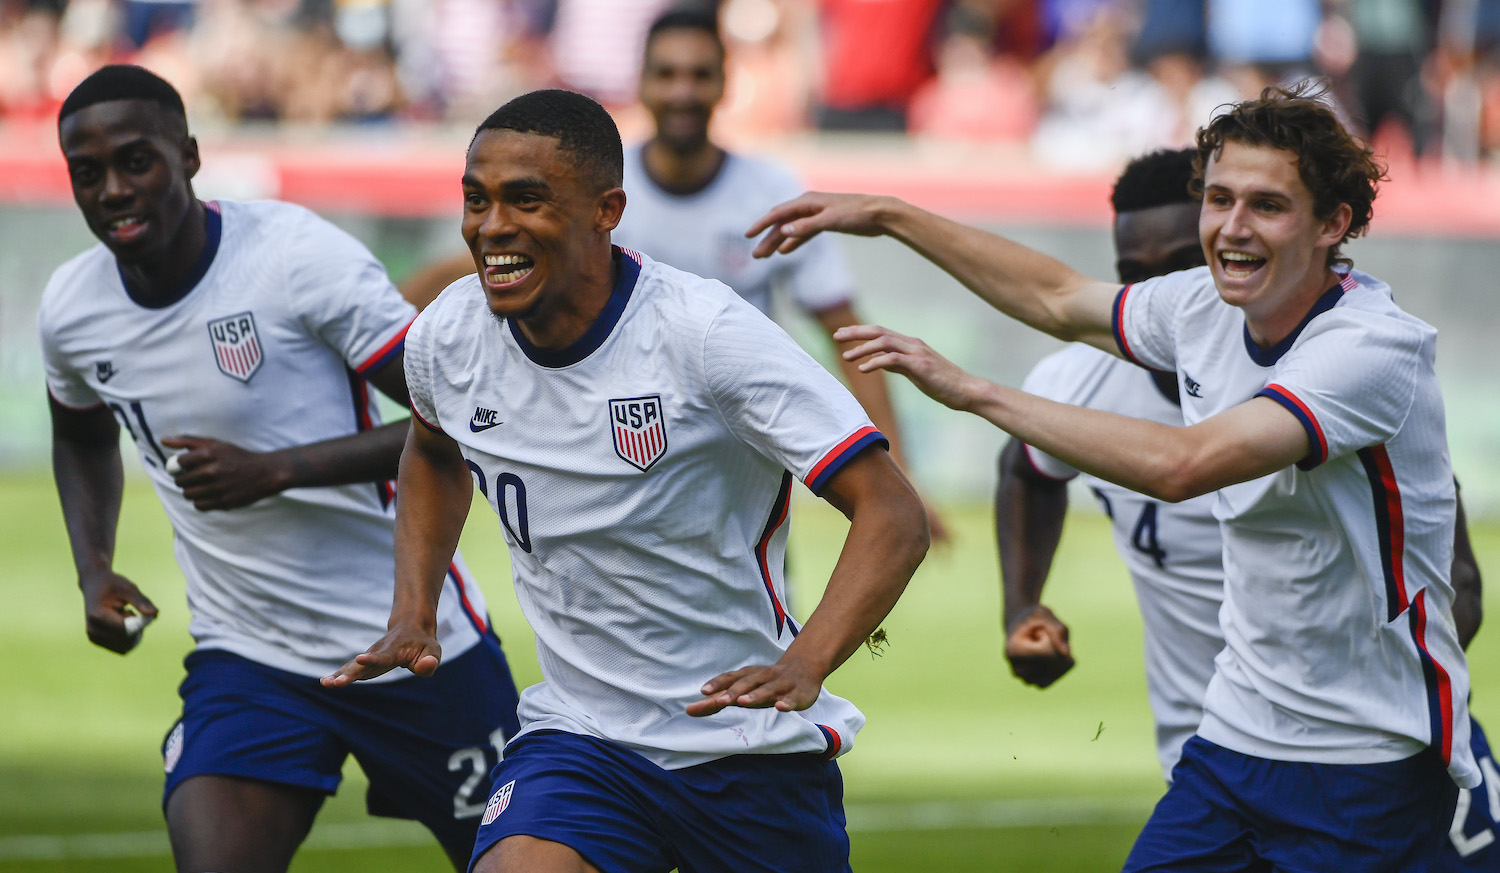 SANDY, UTAH - JUNE 09: Reggie Cannon #20 of the United States celebrates a goal during a game against Costa Rica at Rio Tinto Stadium on June 09, 2021 in Sandy, Utah. (Photo by Alex Goodlett/Getty Images)